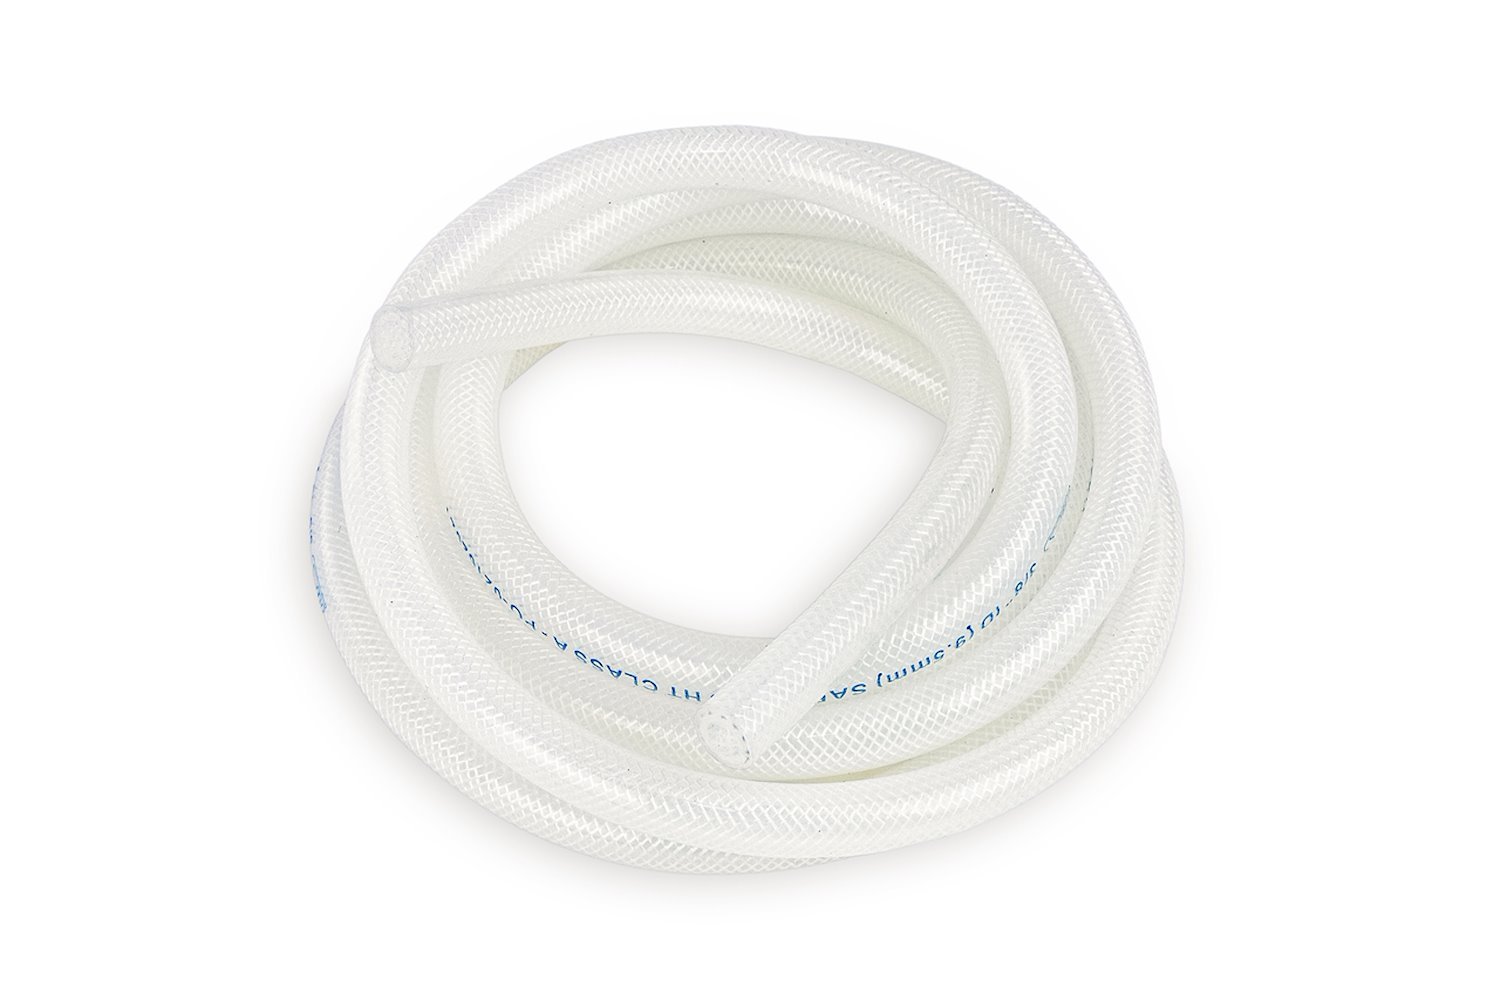 HTHH-050-CLEARx10 Silicone Heater Hose Tubing, High-Temp Reinforced, 1/2 in. ID, 10 ft. Roll, Clear